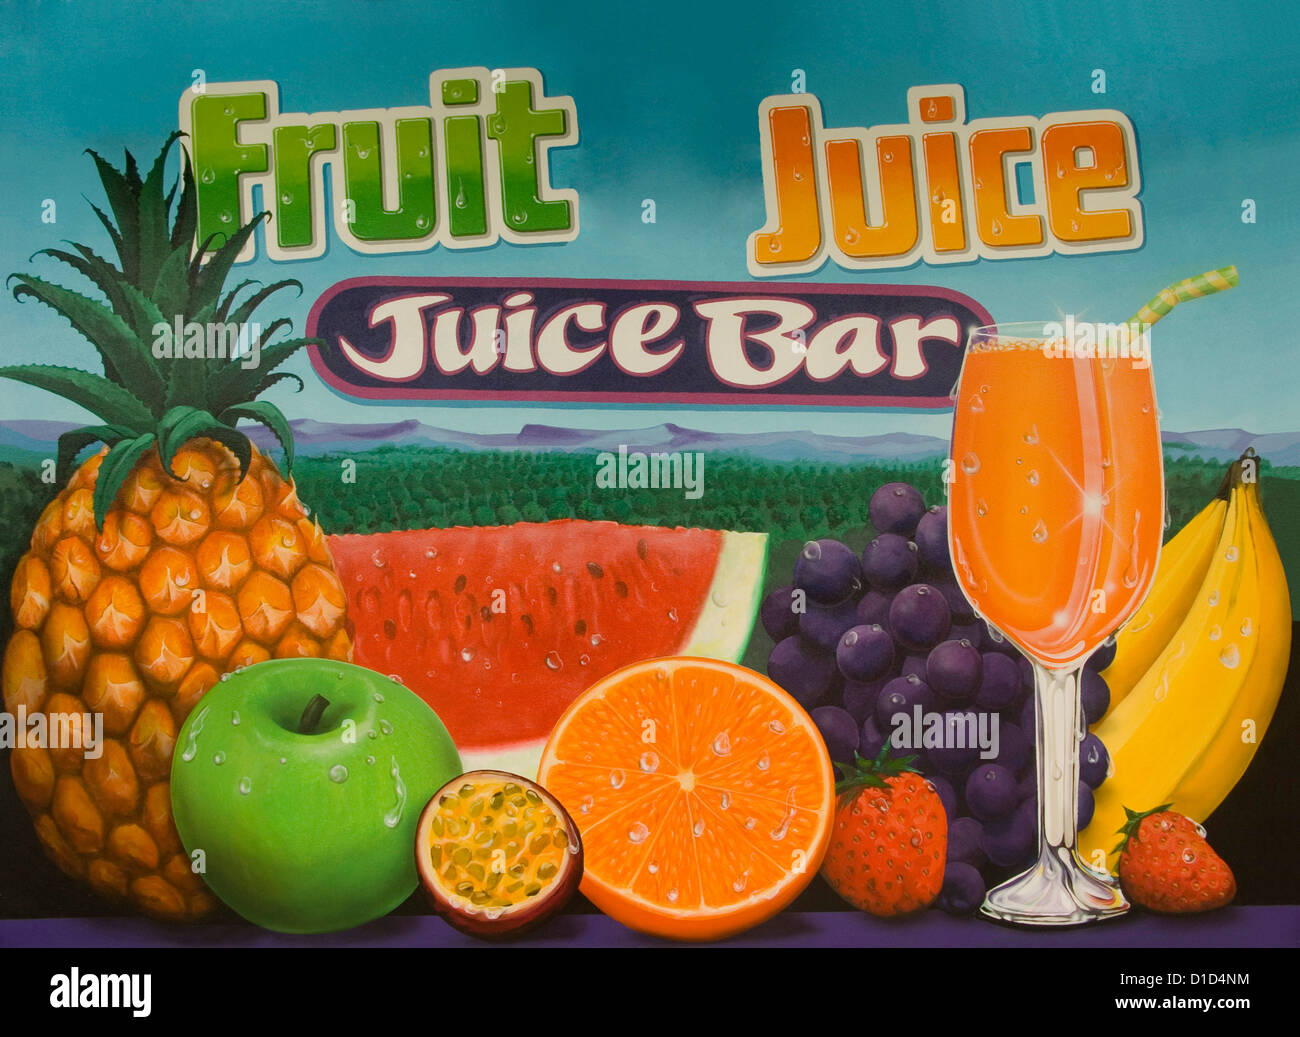 Fruit juice bar / shop sign with oranges,apples,pineapple,melon, and glass  of juice Stock Photo - Alamy